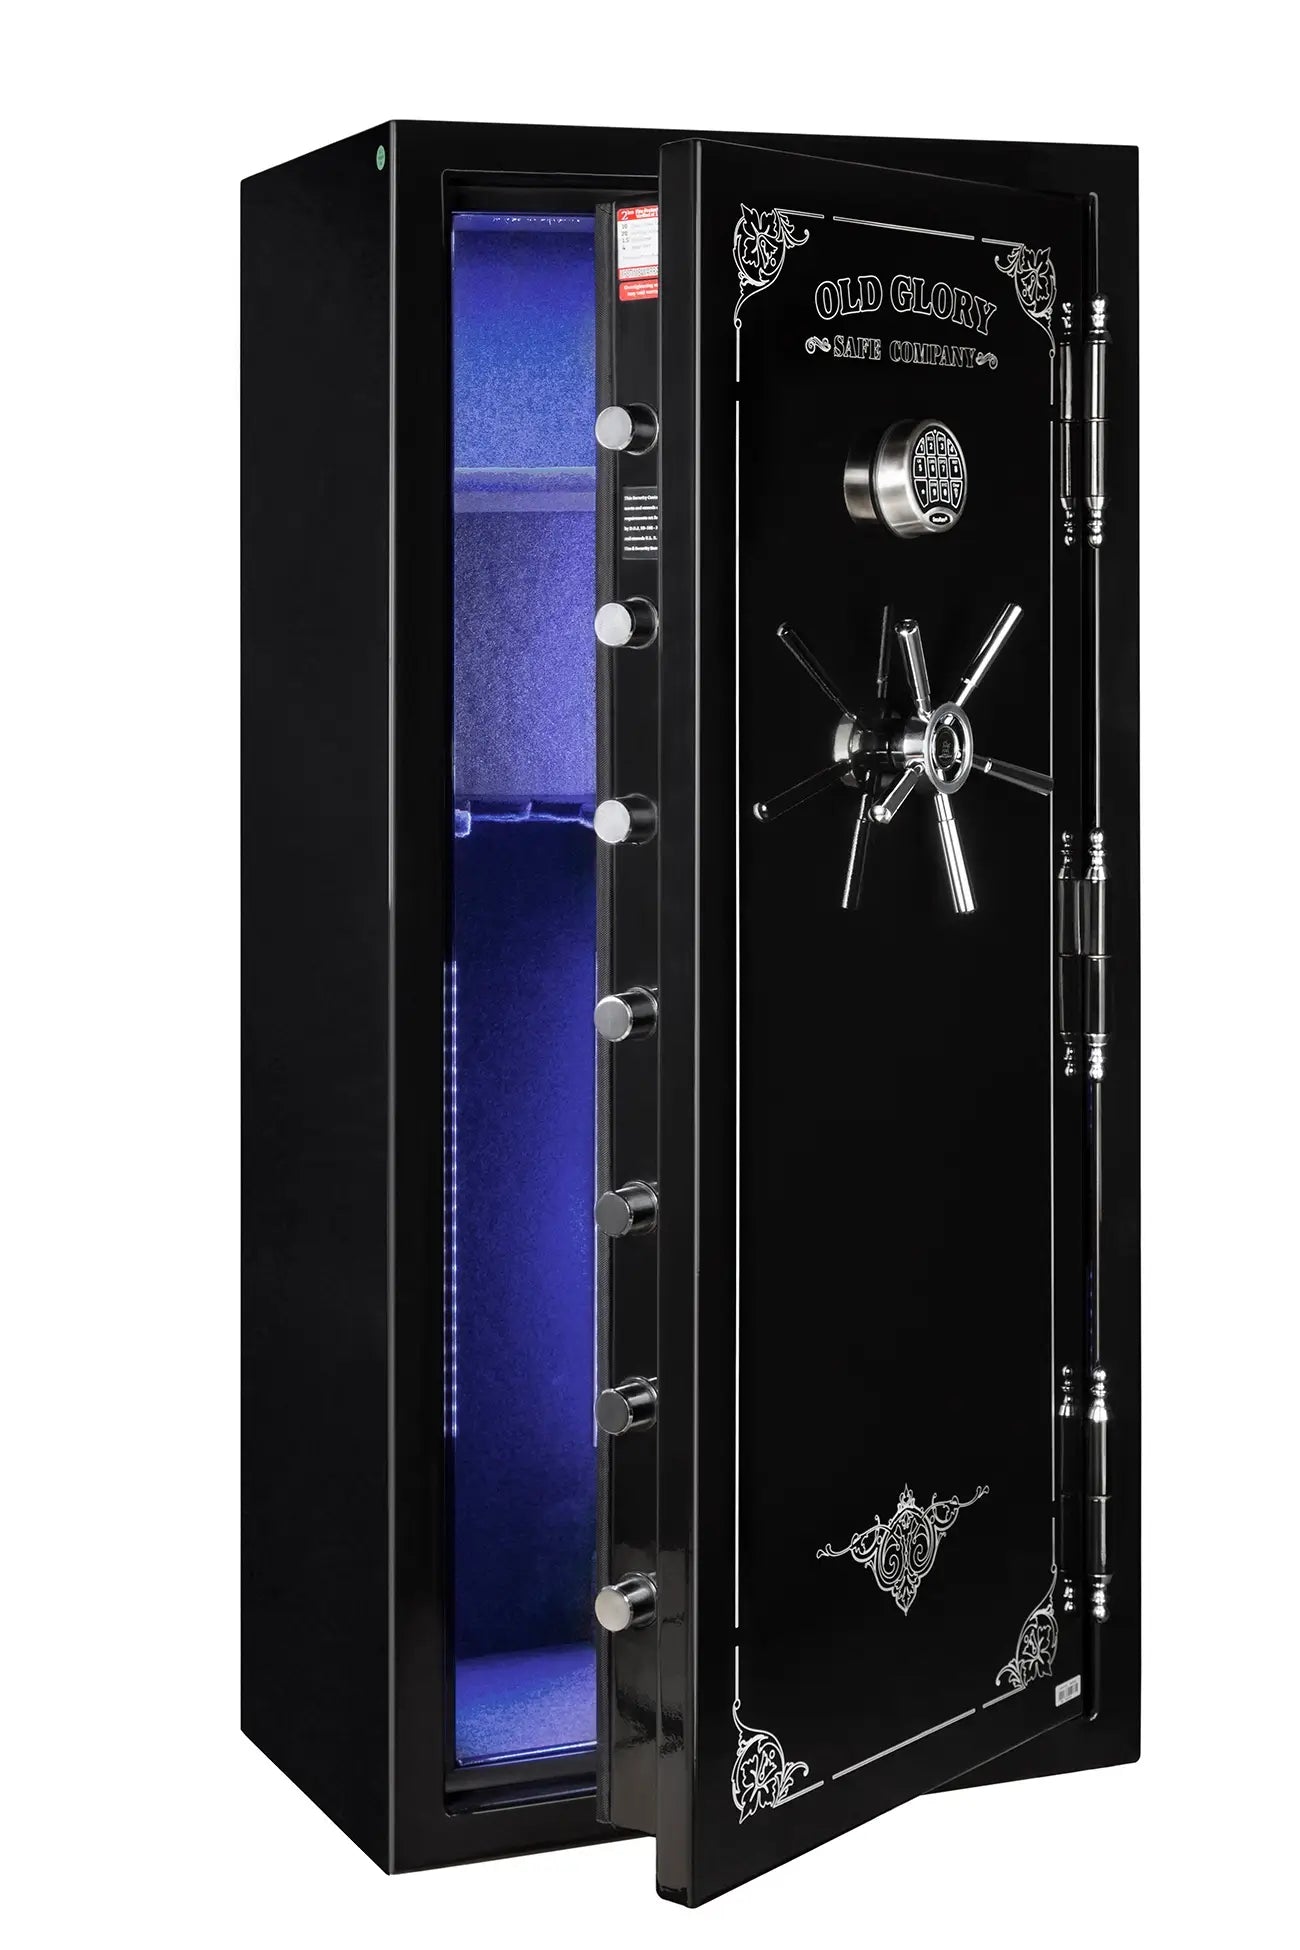 60 inch tall by 28 inch wide Old Glory gun safe unlocked in gloss black with blue LED lights